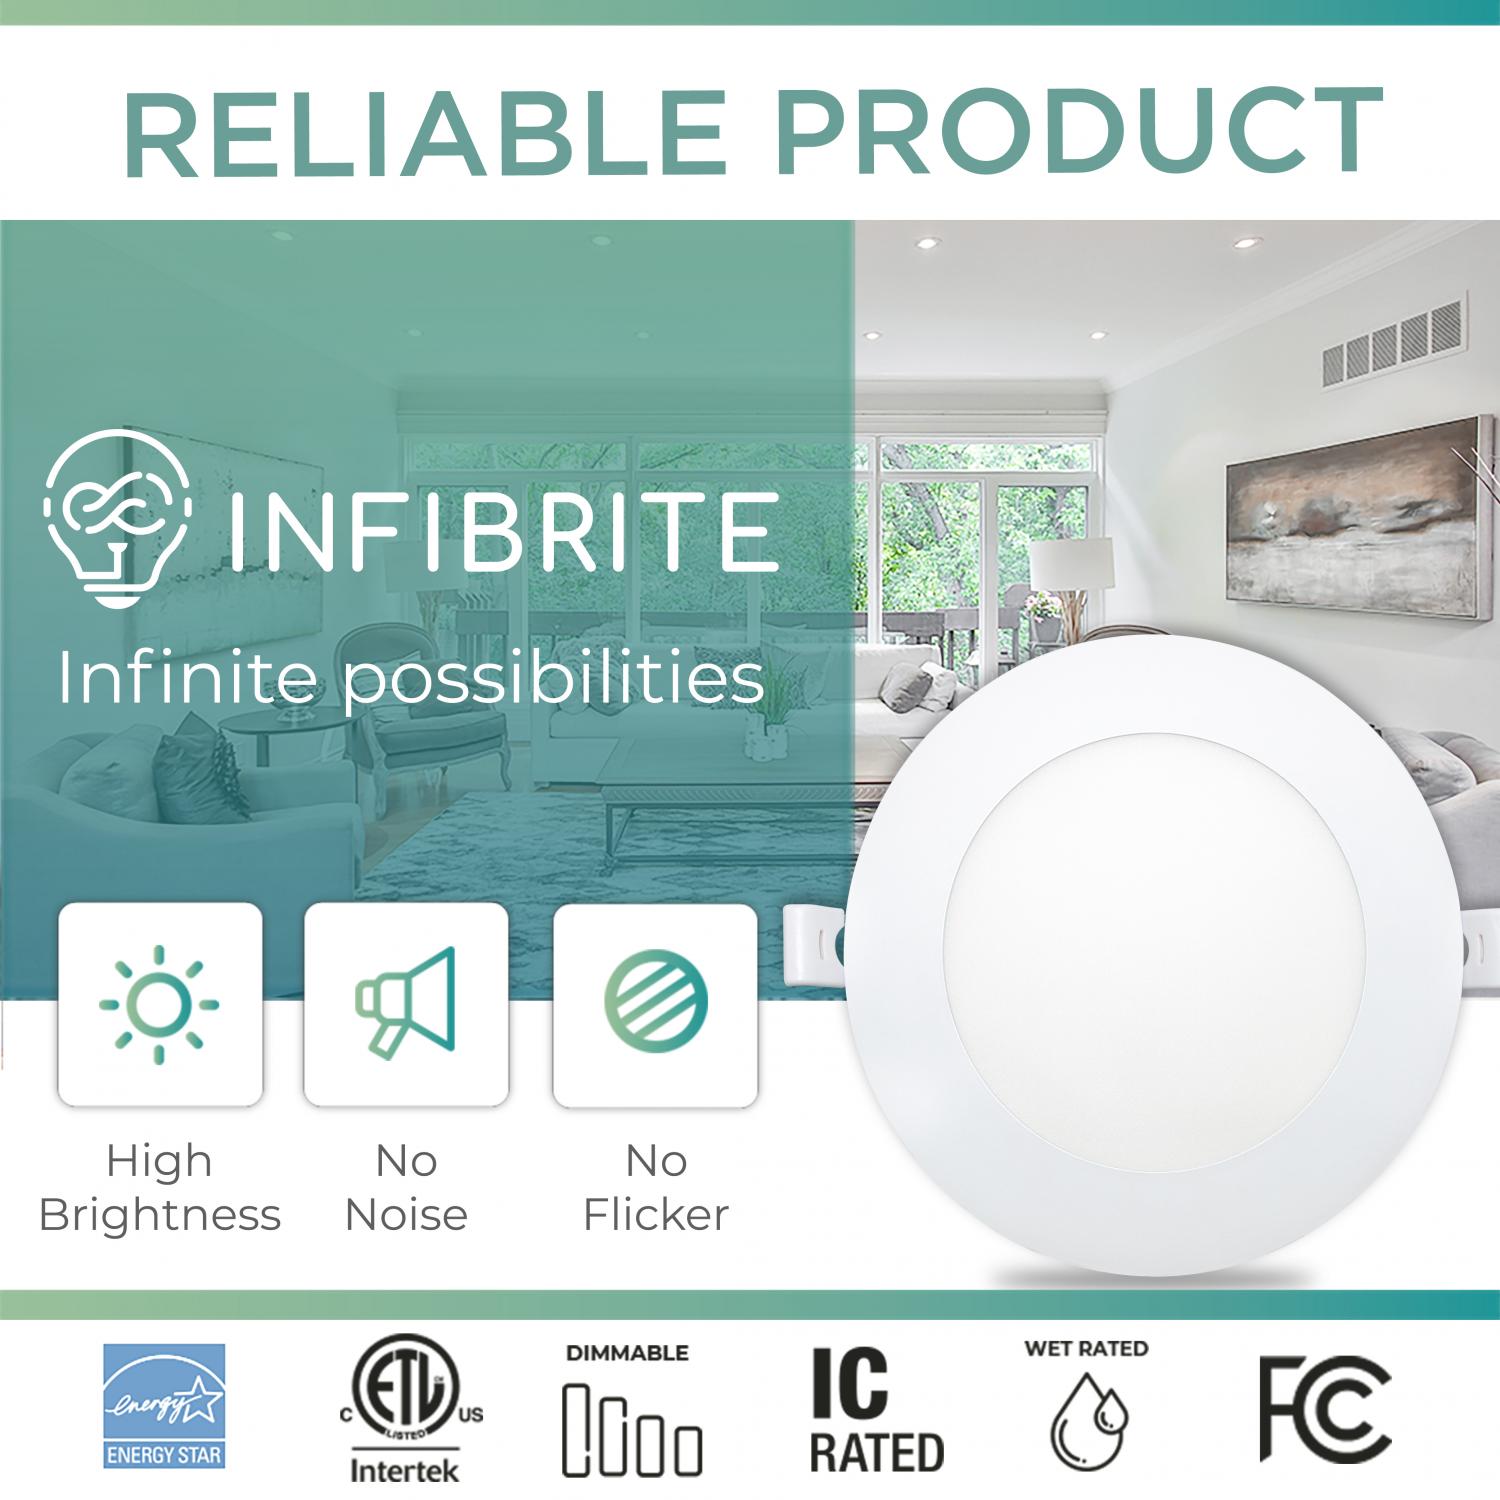 Infibrite 6 Inch 4000K Cool White 12W 1050LM Ultra-Slim LED Ceiling Light with Junction Box, Flush Mount, Dimmable, Fixture for Bedroom, Wet Rated for Bathroom, Easy Install, 110W Eqv, ETL & Energy Star, US Company (6 Pack)